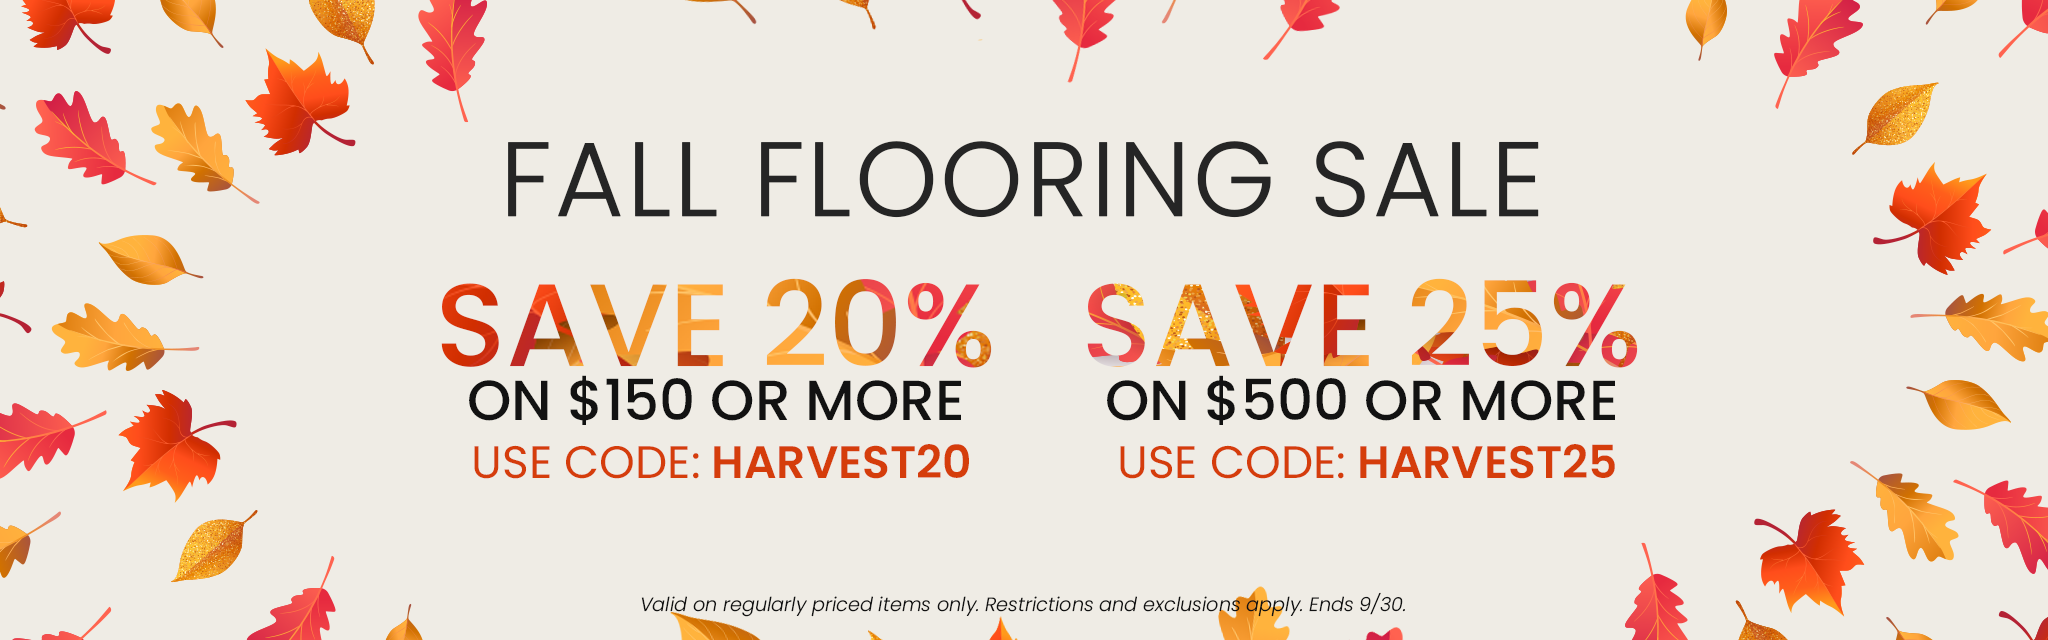 Fall Flooring Sale. Save 20% on Orders $150 or More | Code: HARVEST20  Save 25% on Orders $500 or More | Code: HARVEST25. Valid on regularly priced items only. Restrictions and exclusions apply. End 9/30